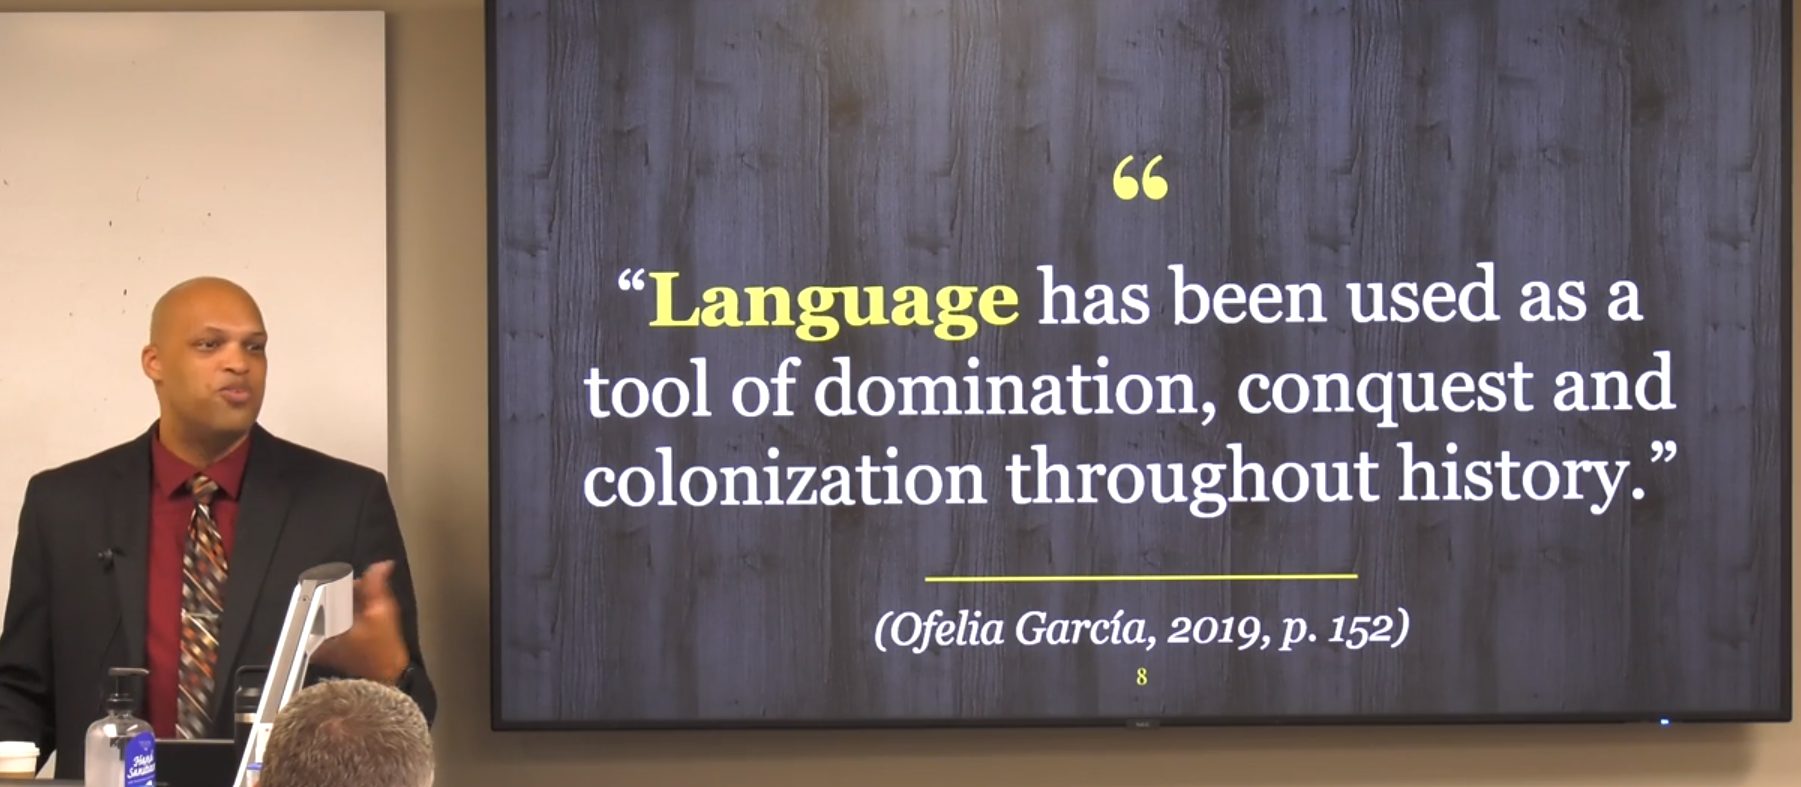 LJ Randolph leads the workshop next to a presentation slide that says, "Language has been used as a tool of domination, conquest and colonization throughout history."